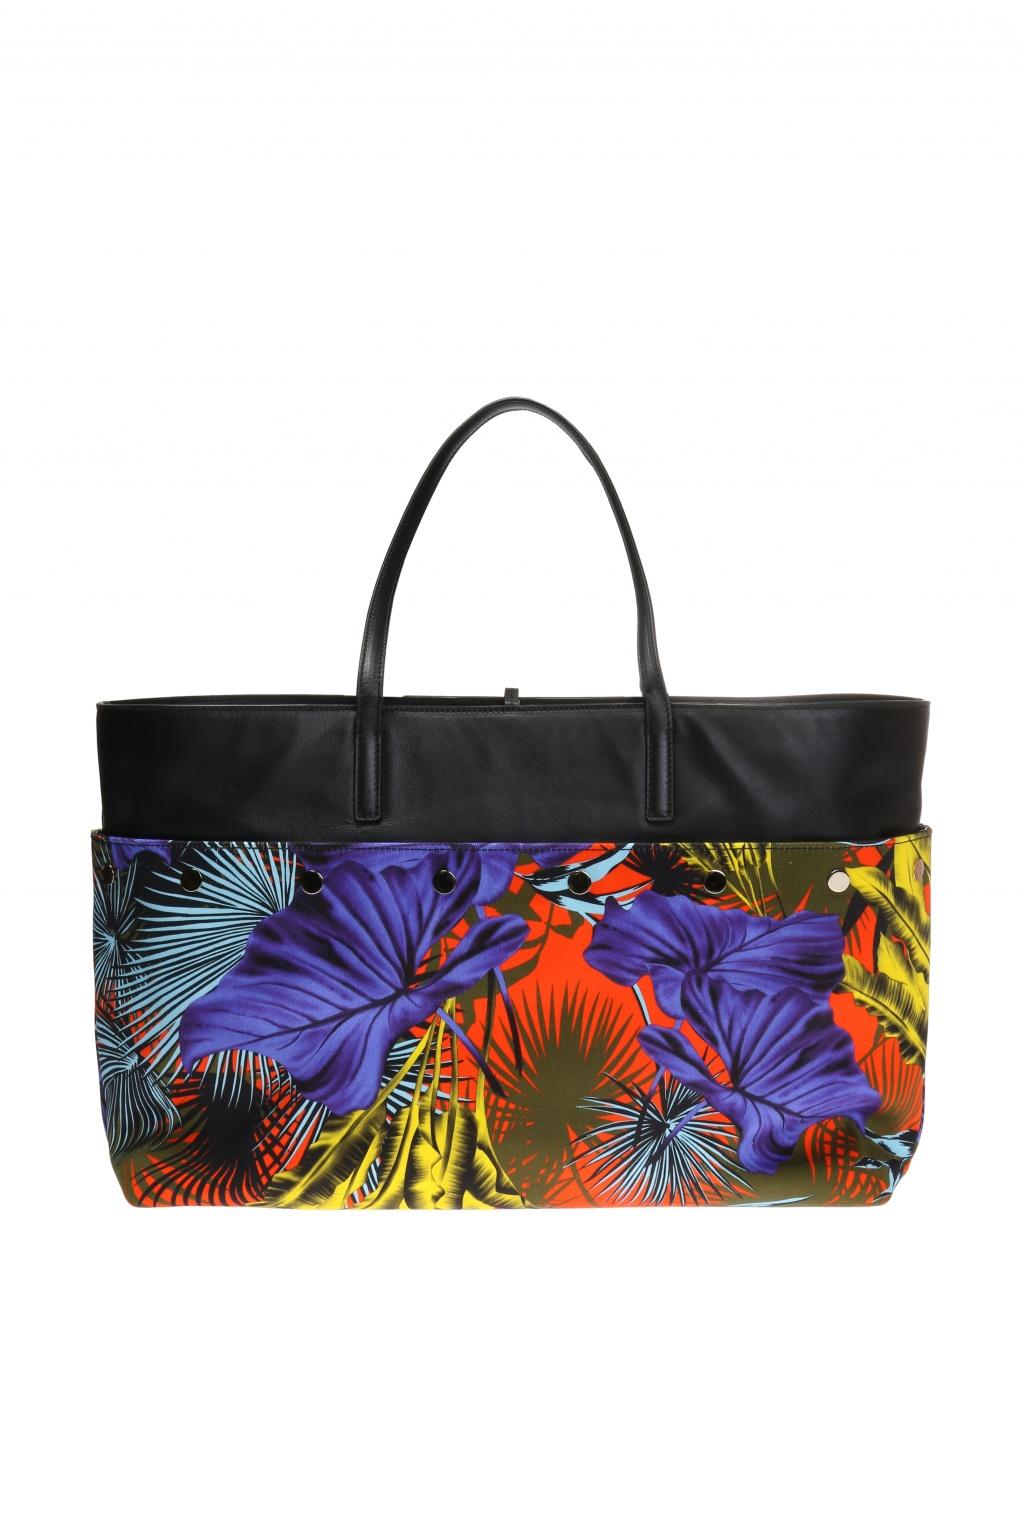 Black Versace SS18 Multicolor Desert Palm Shopping Tote Bag with Leather Straps